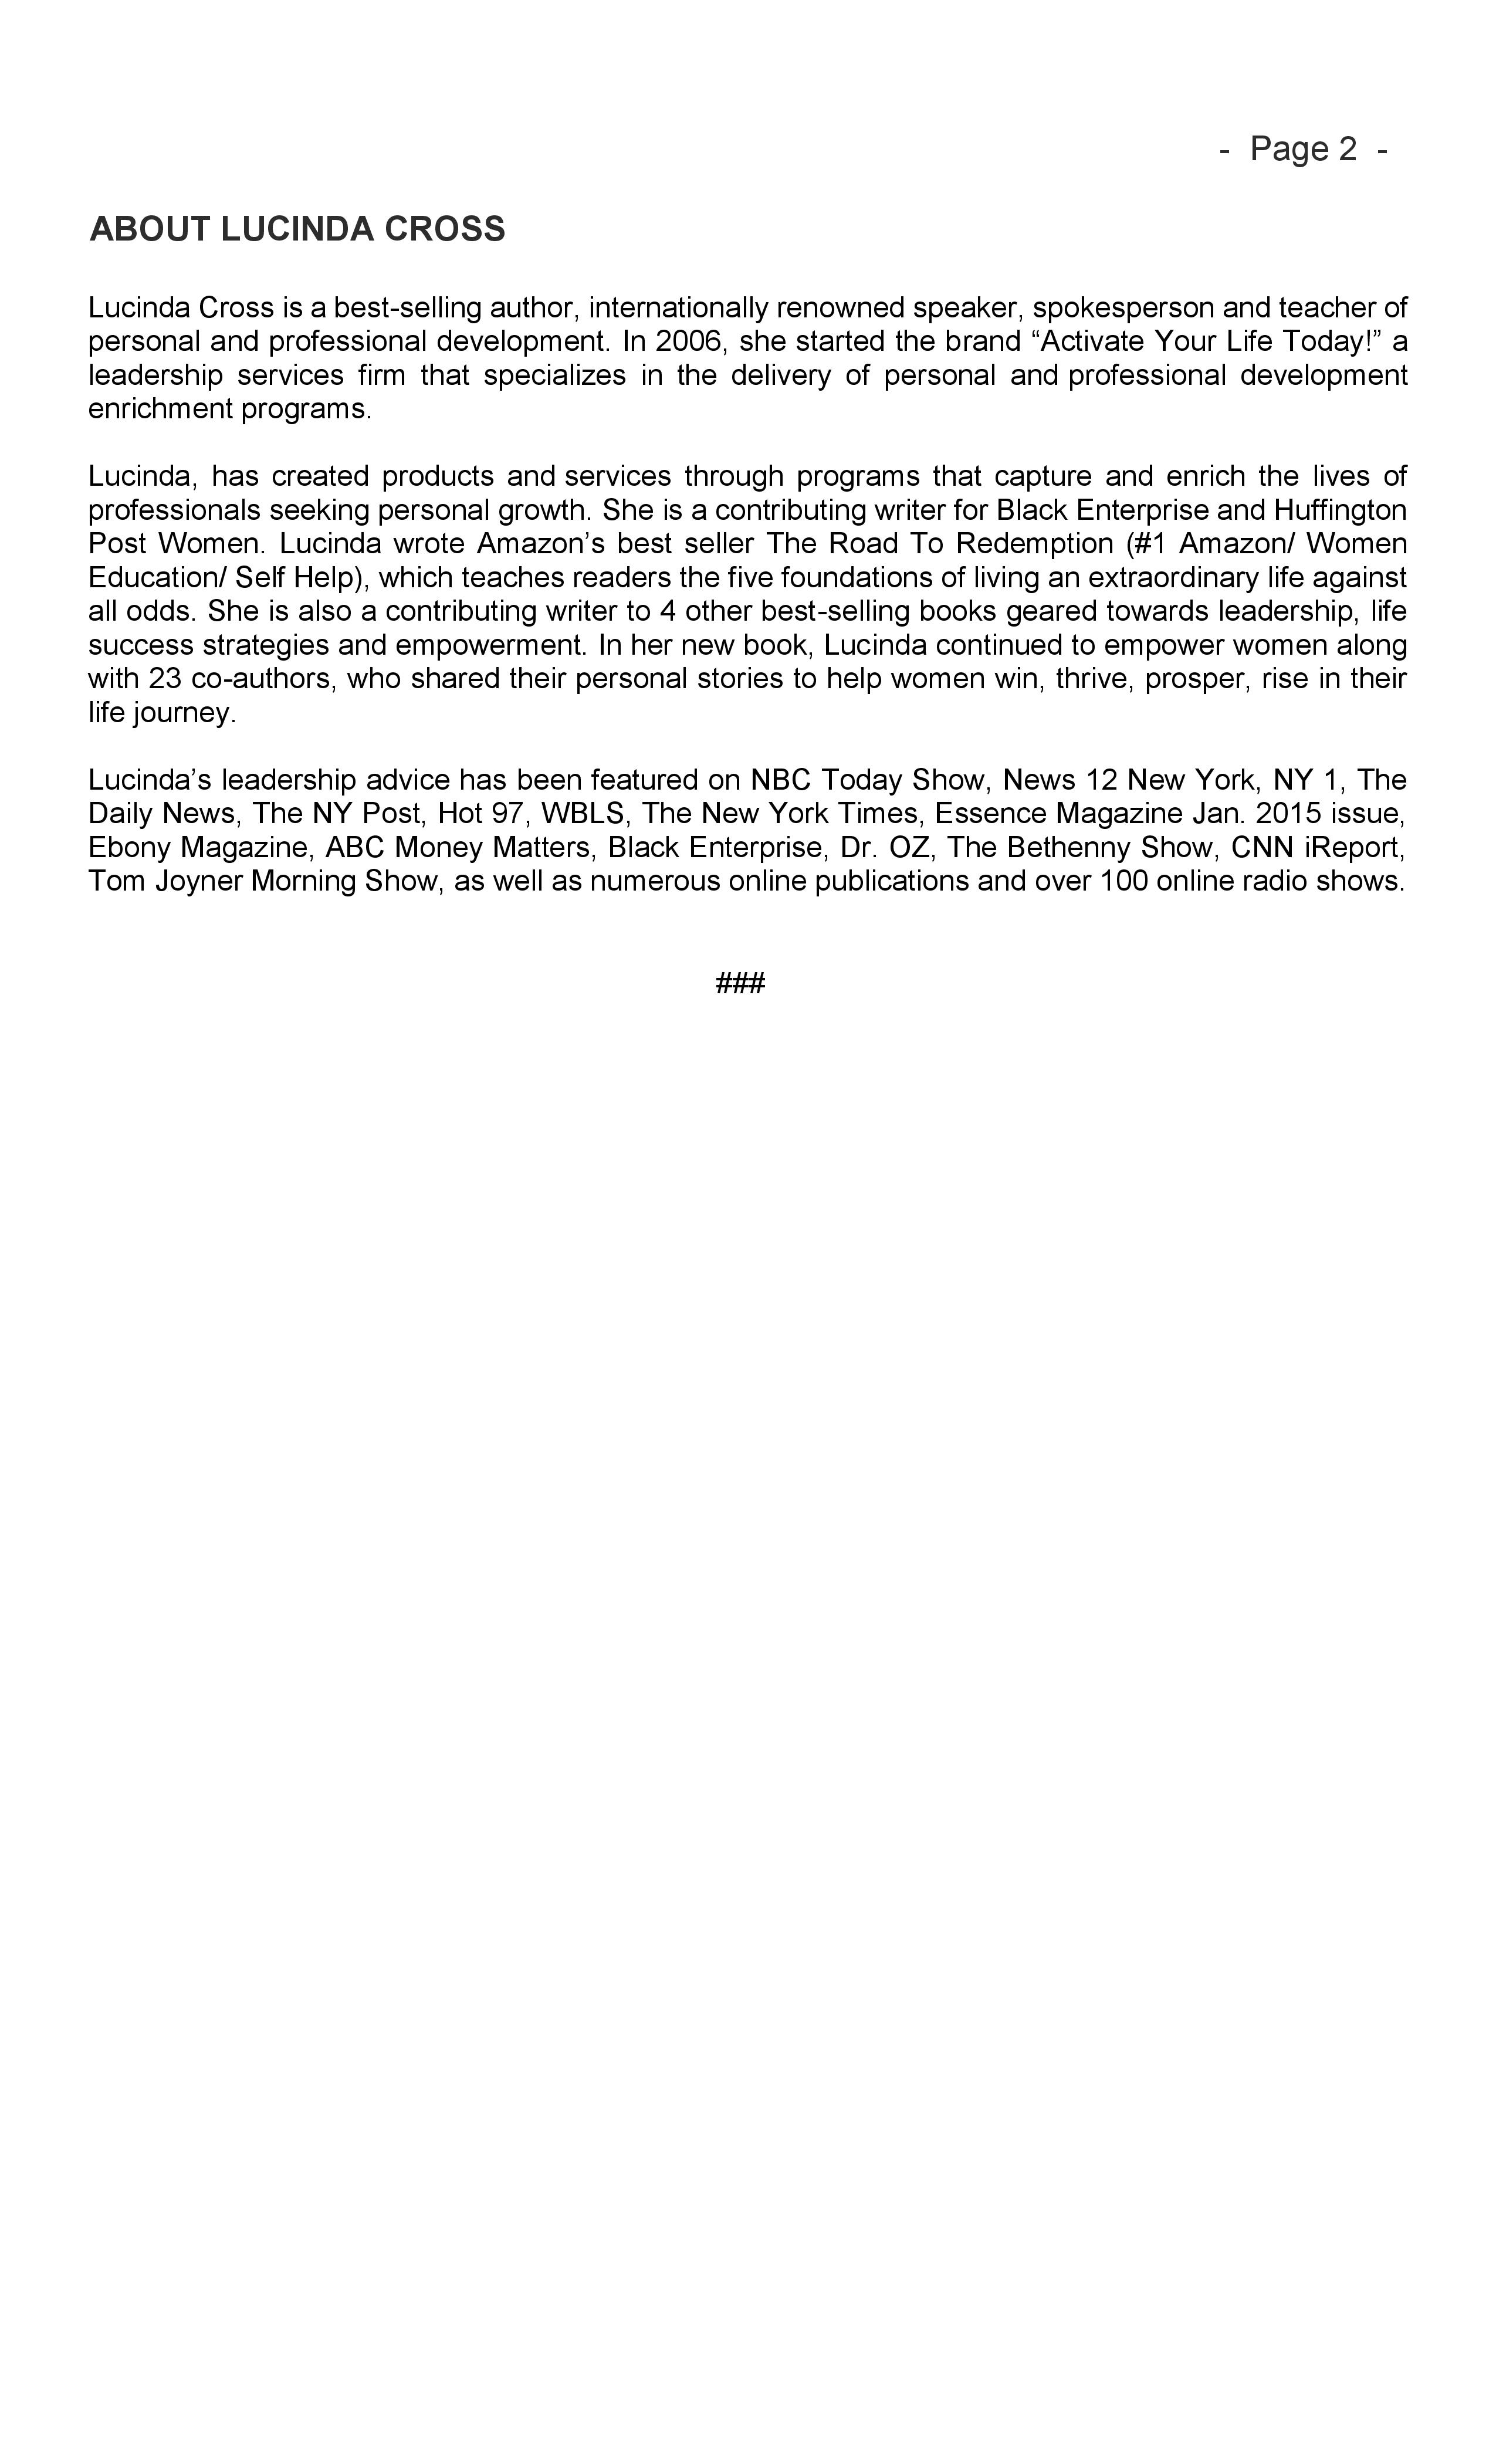 Activate Press Release - September 1, 2015-page-002